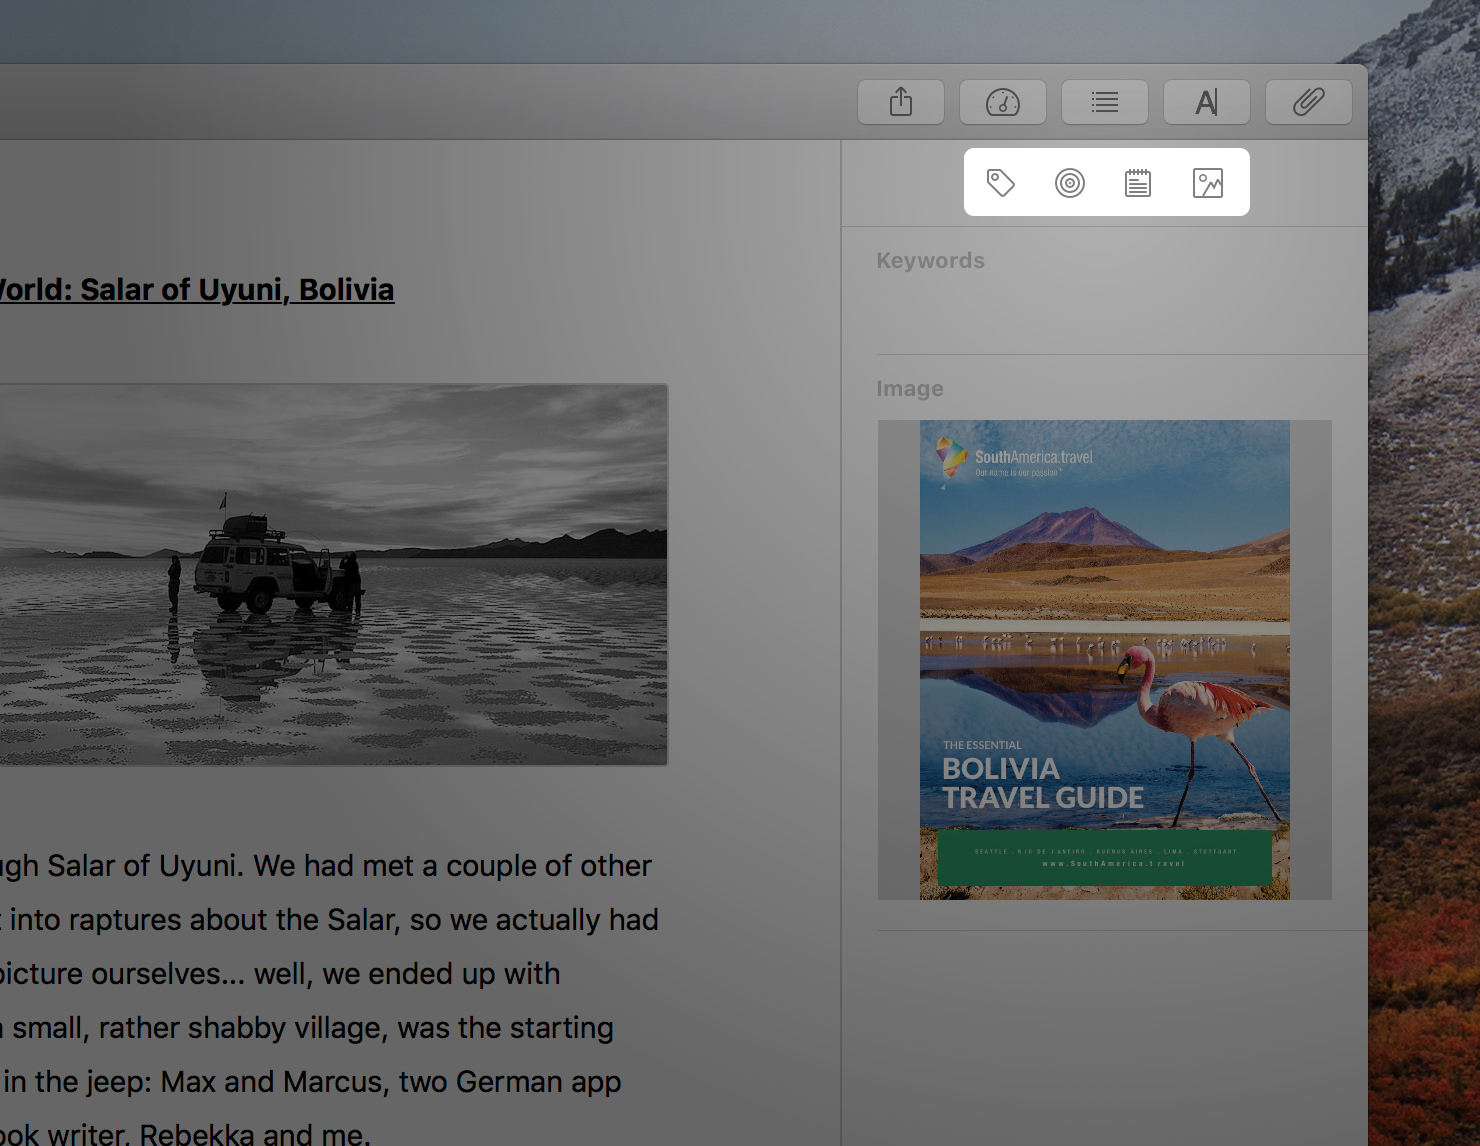 Attachments types: keywords, goals, notes and images/PDF files (from left to right)